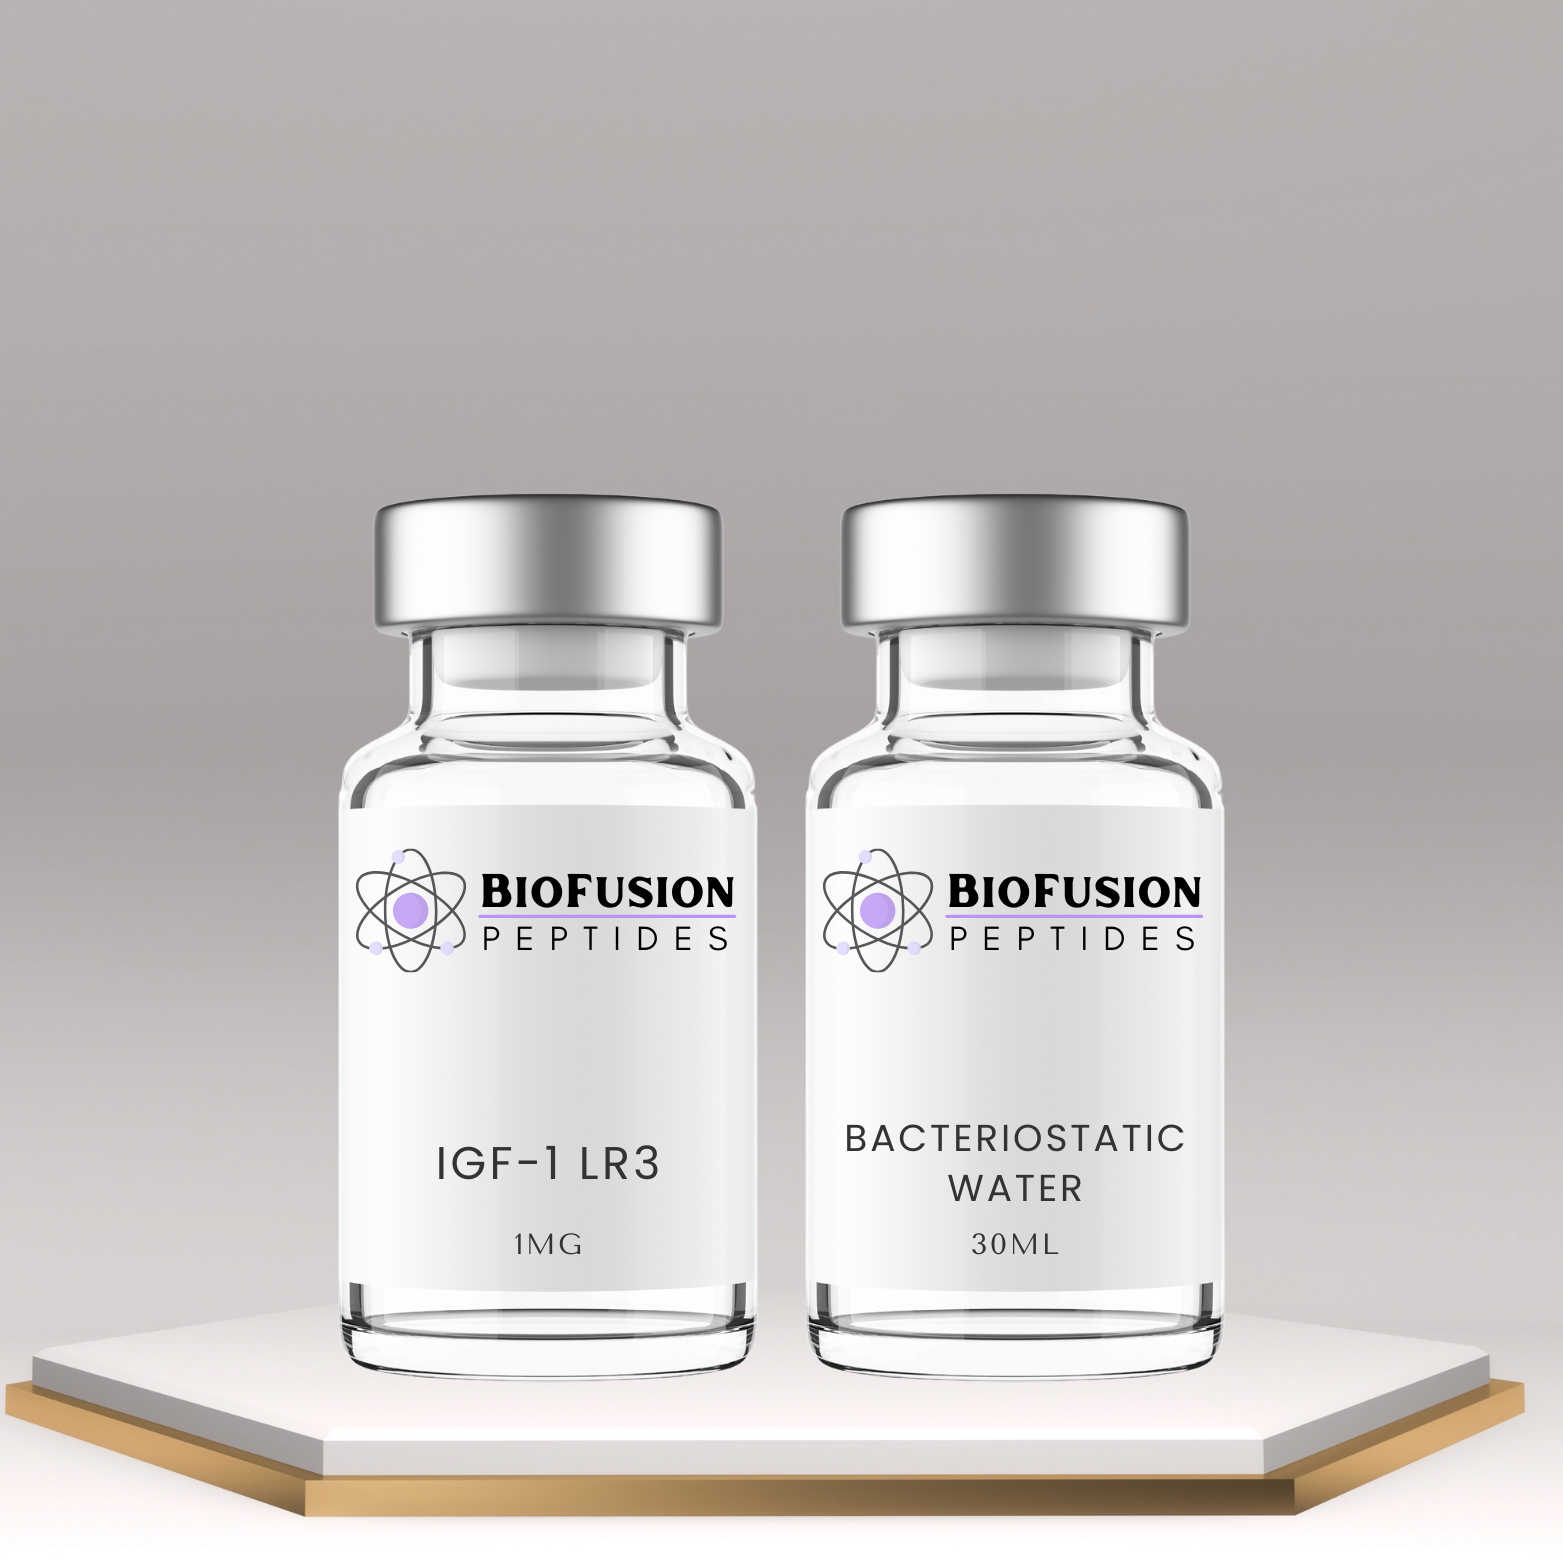 BioFusion Peptides IGF-1 LR3 kit with bacteriostatic water